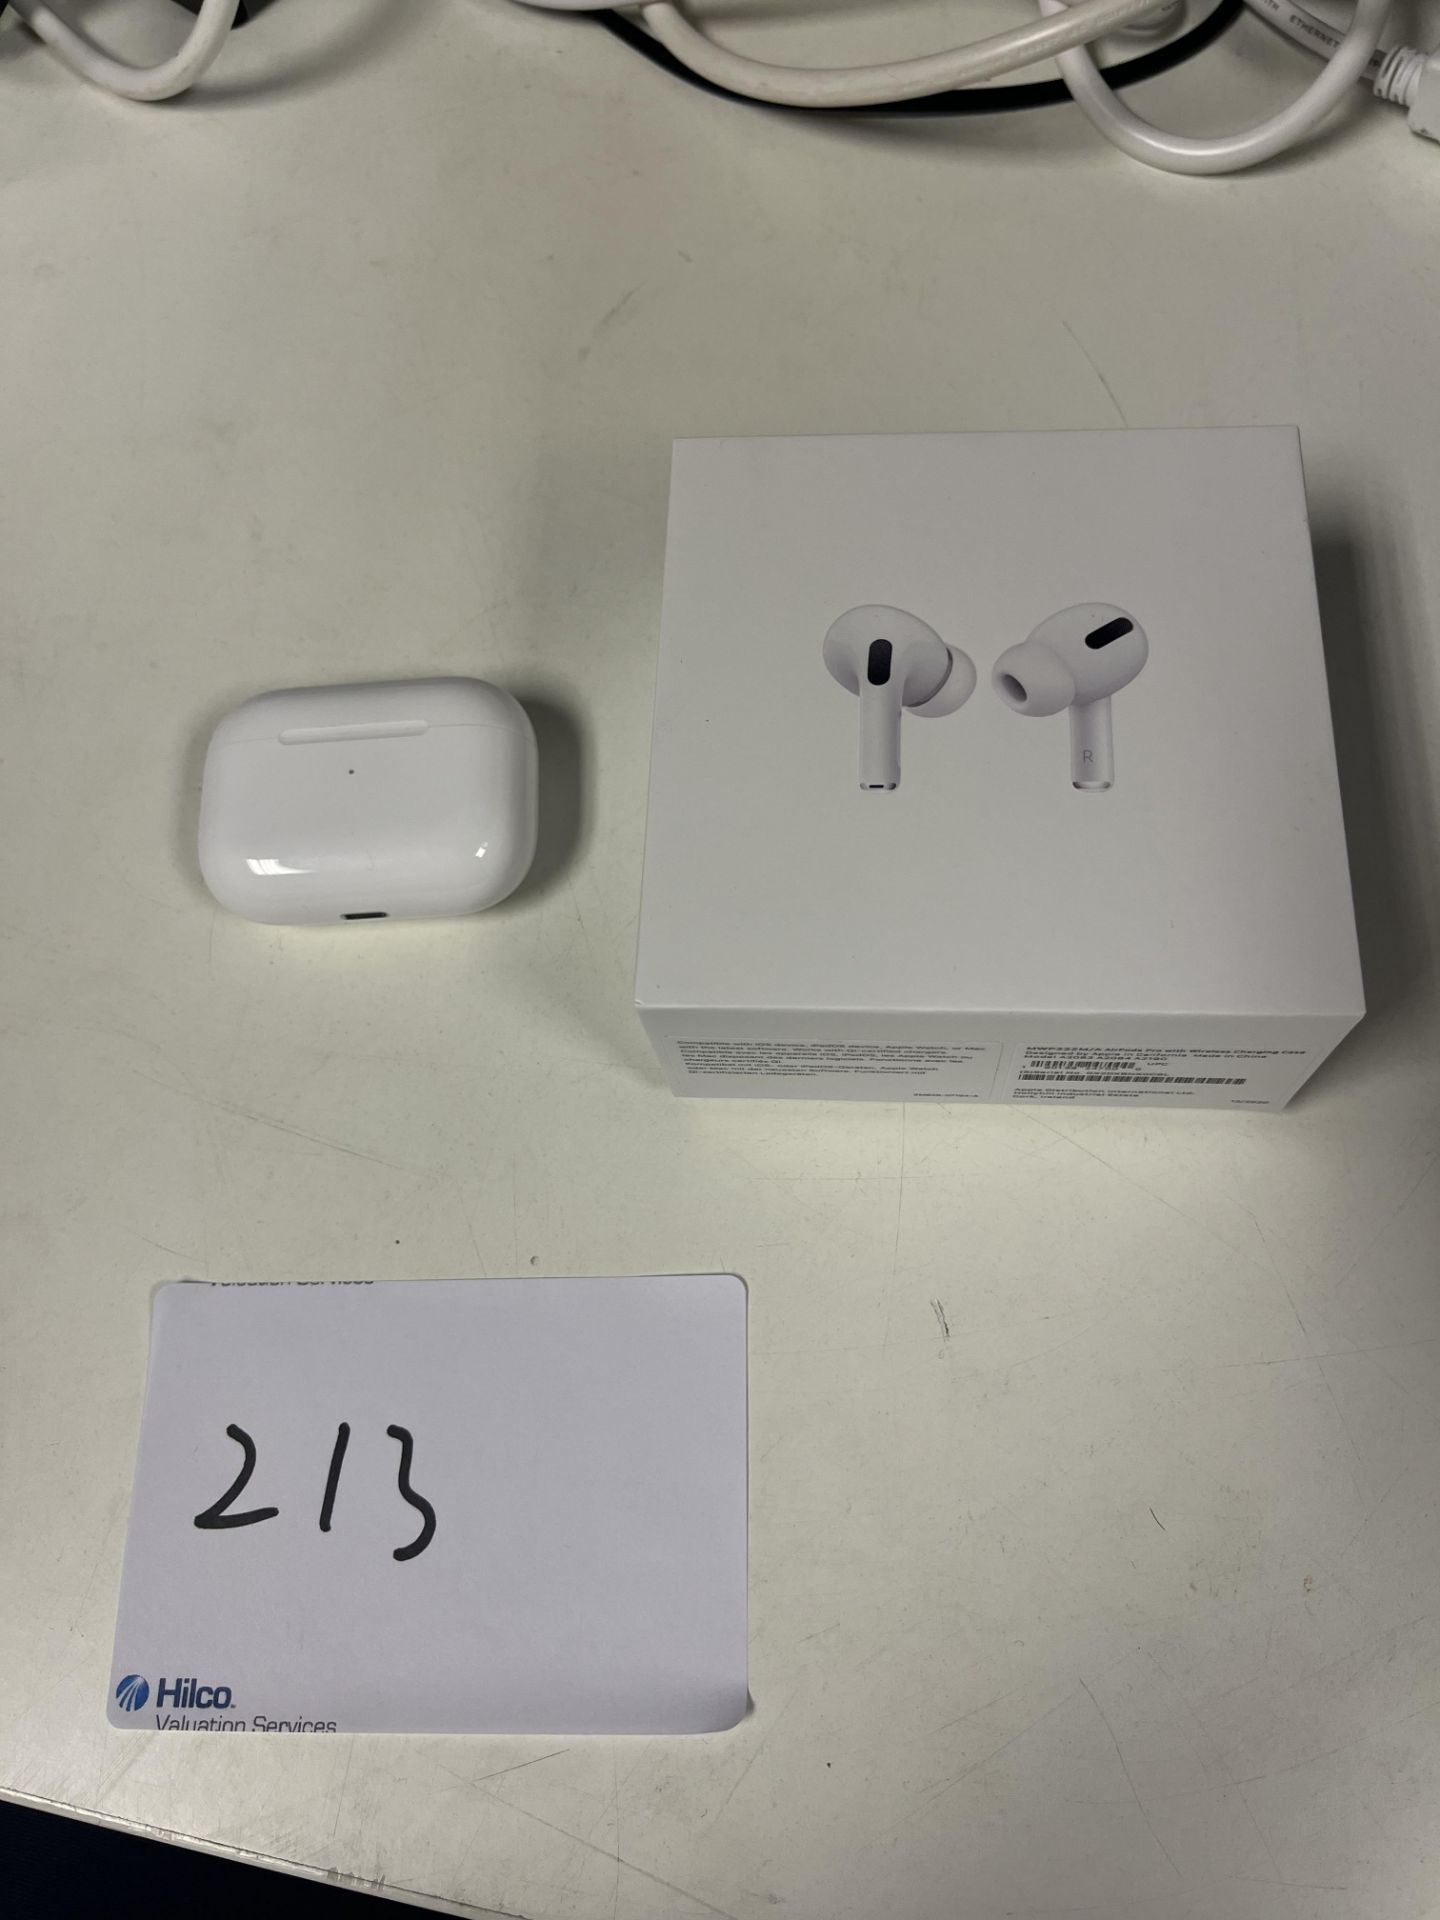 Apple AirPod Pro with Wireless Charging Case With box. Serial No.GX2DXBNK0C6L